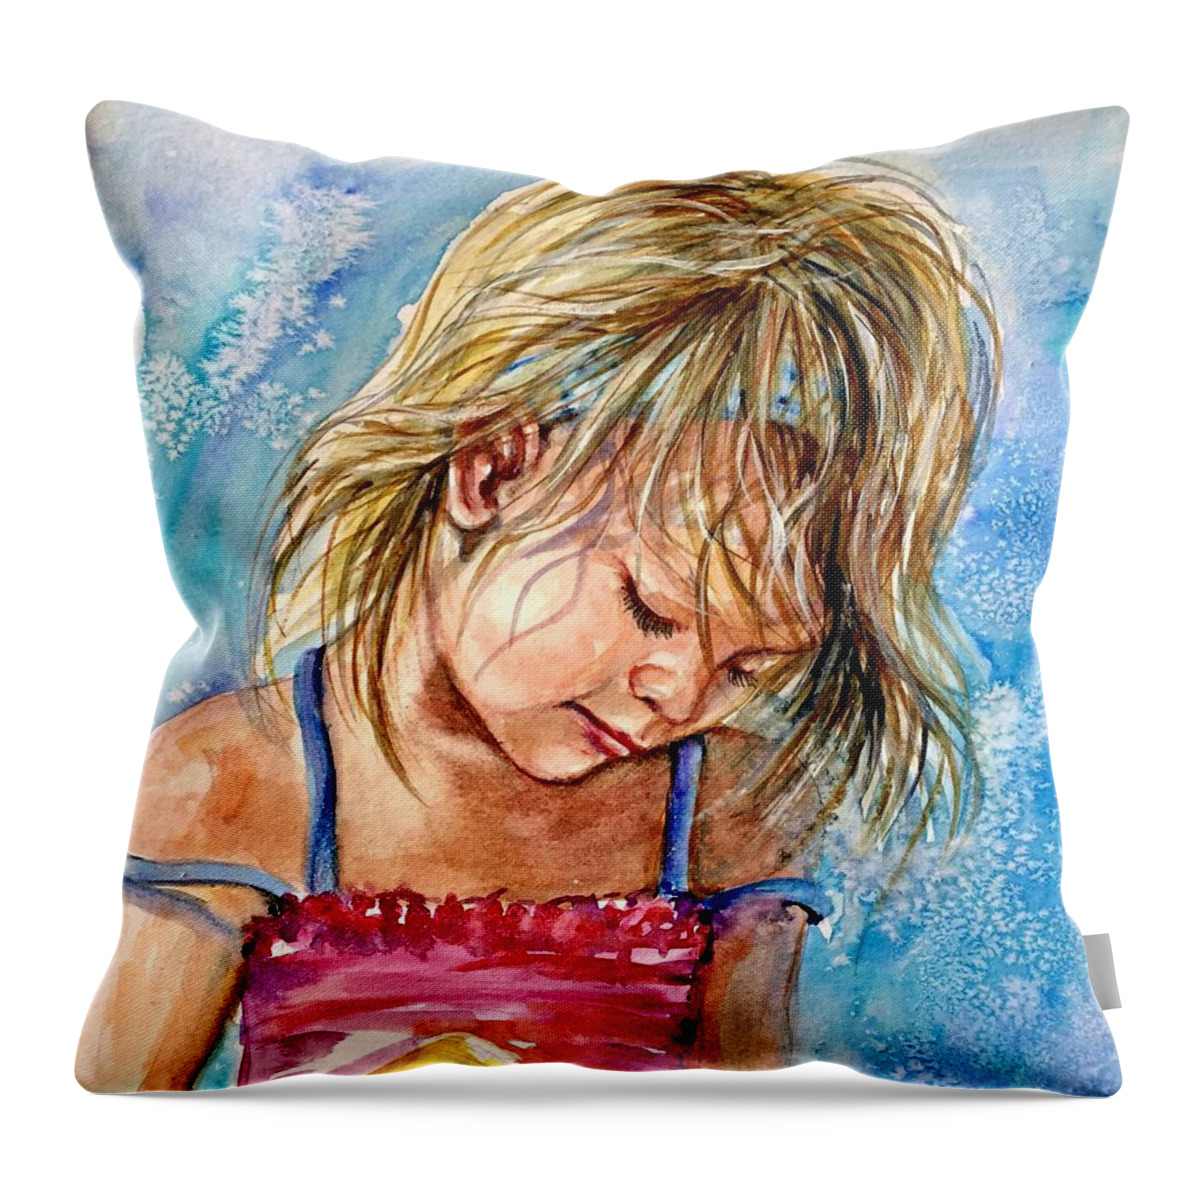 A Girl Throw Pillow featuring the painting The princess of the sand castle by Katerina Kovatcheva